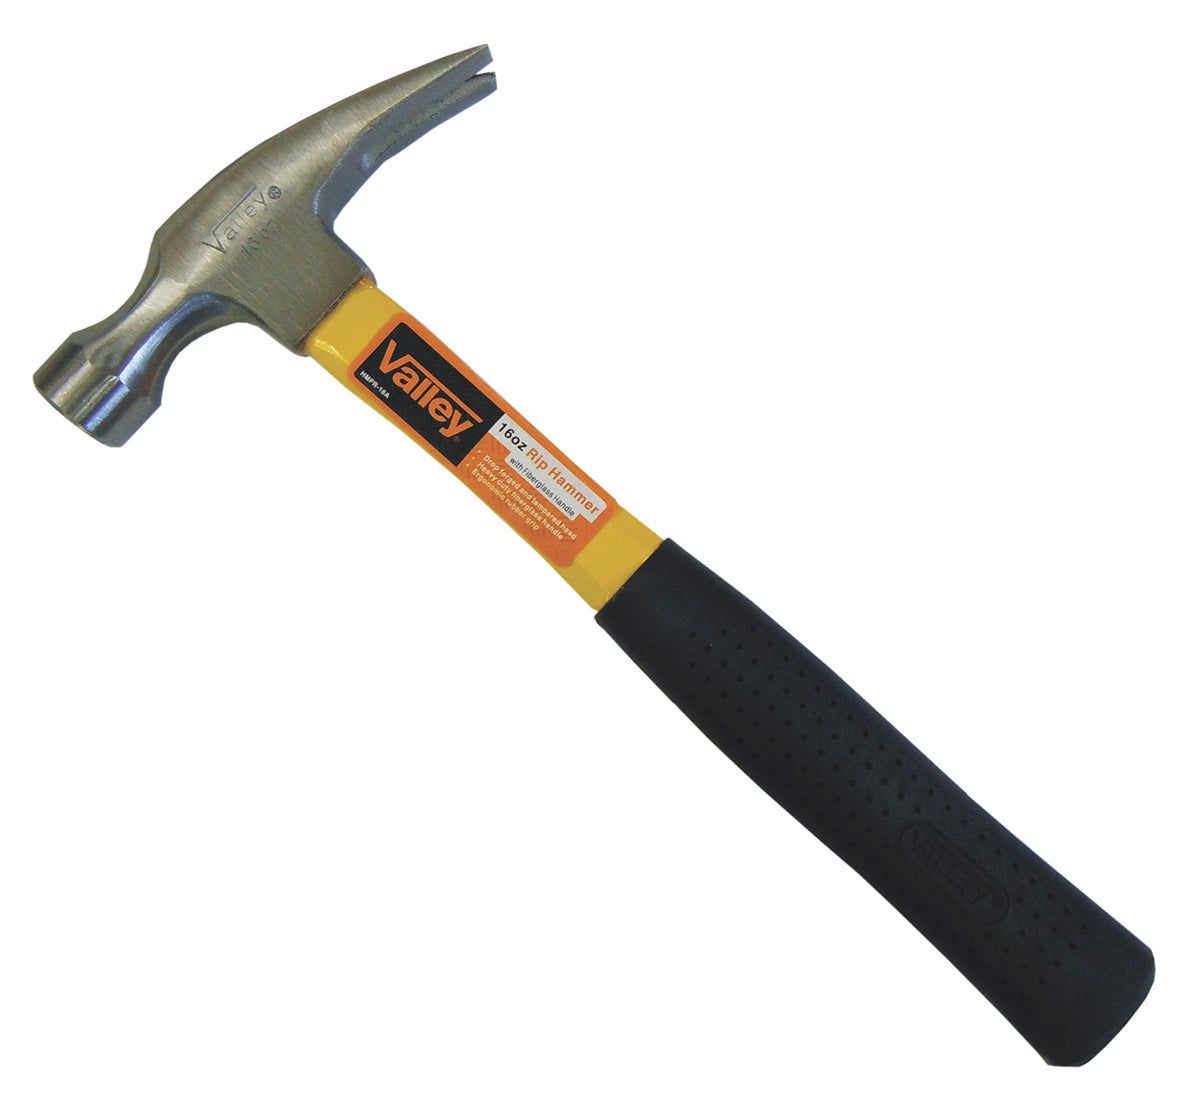 16oz Rip Hammer with Fiber Glass Handle and Grip